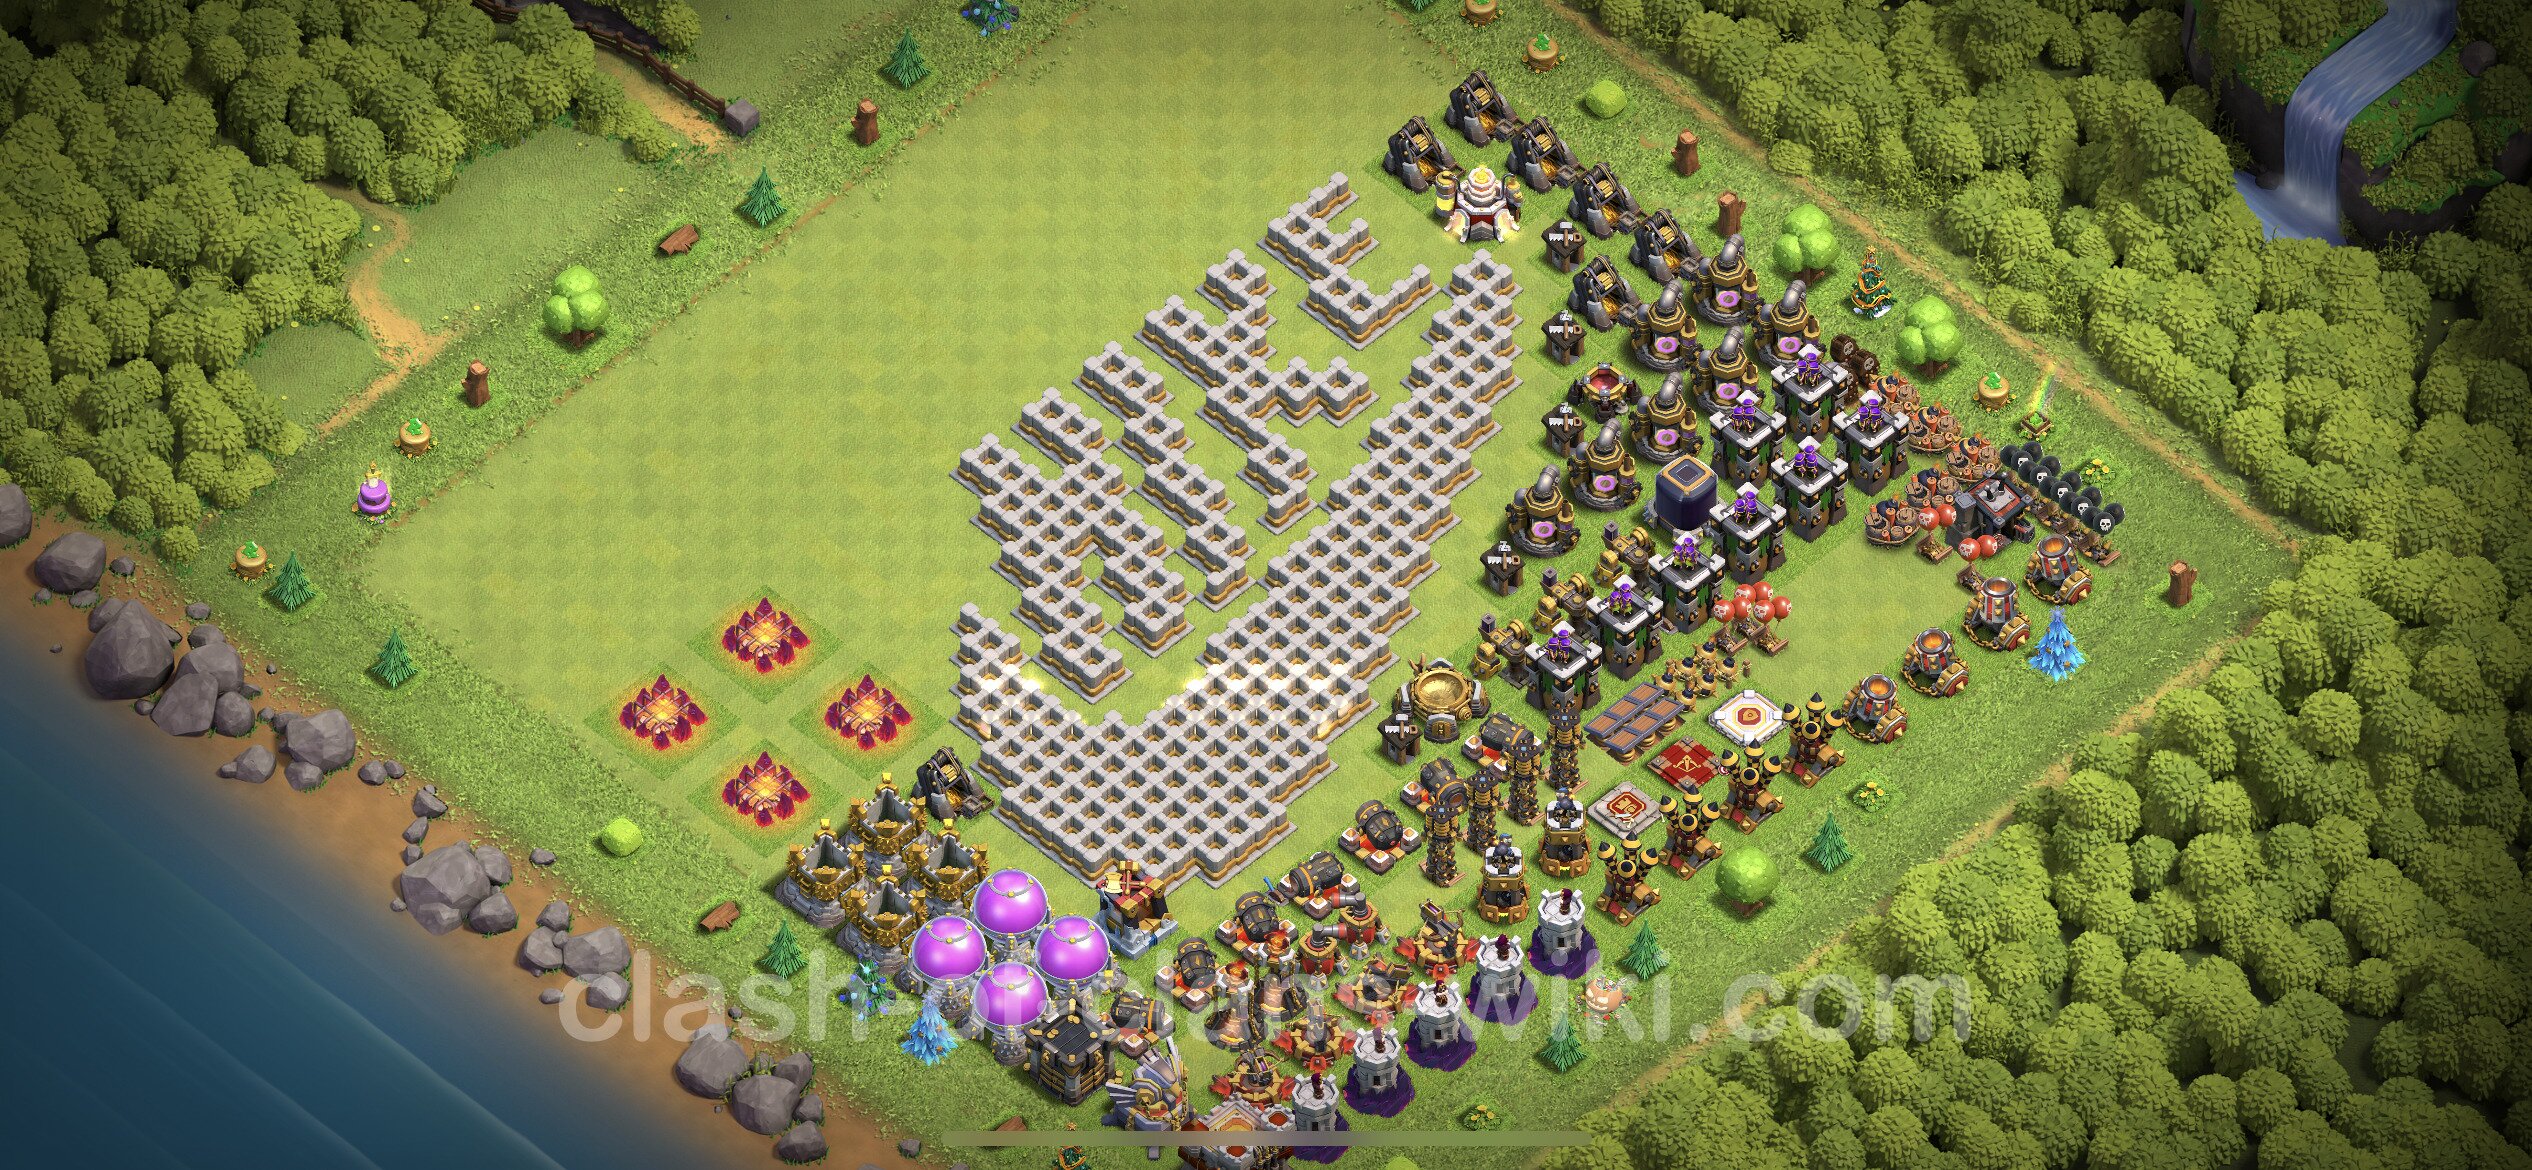 Funny Troll Base TH11 with Link - Town Hall Level 11 Art Base Copy, #5